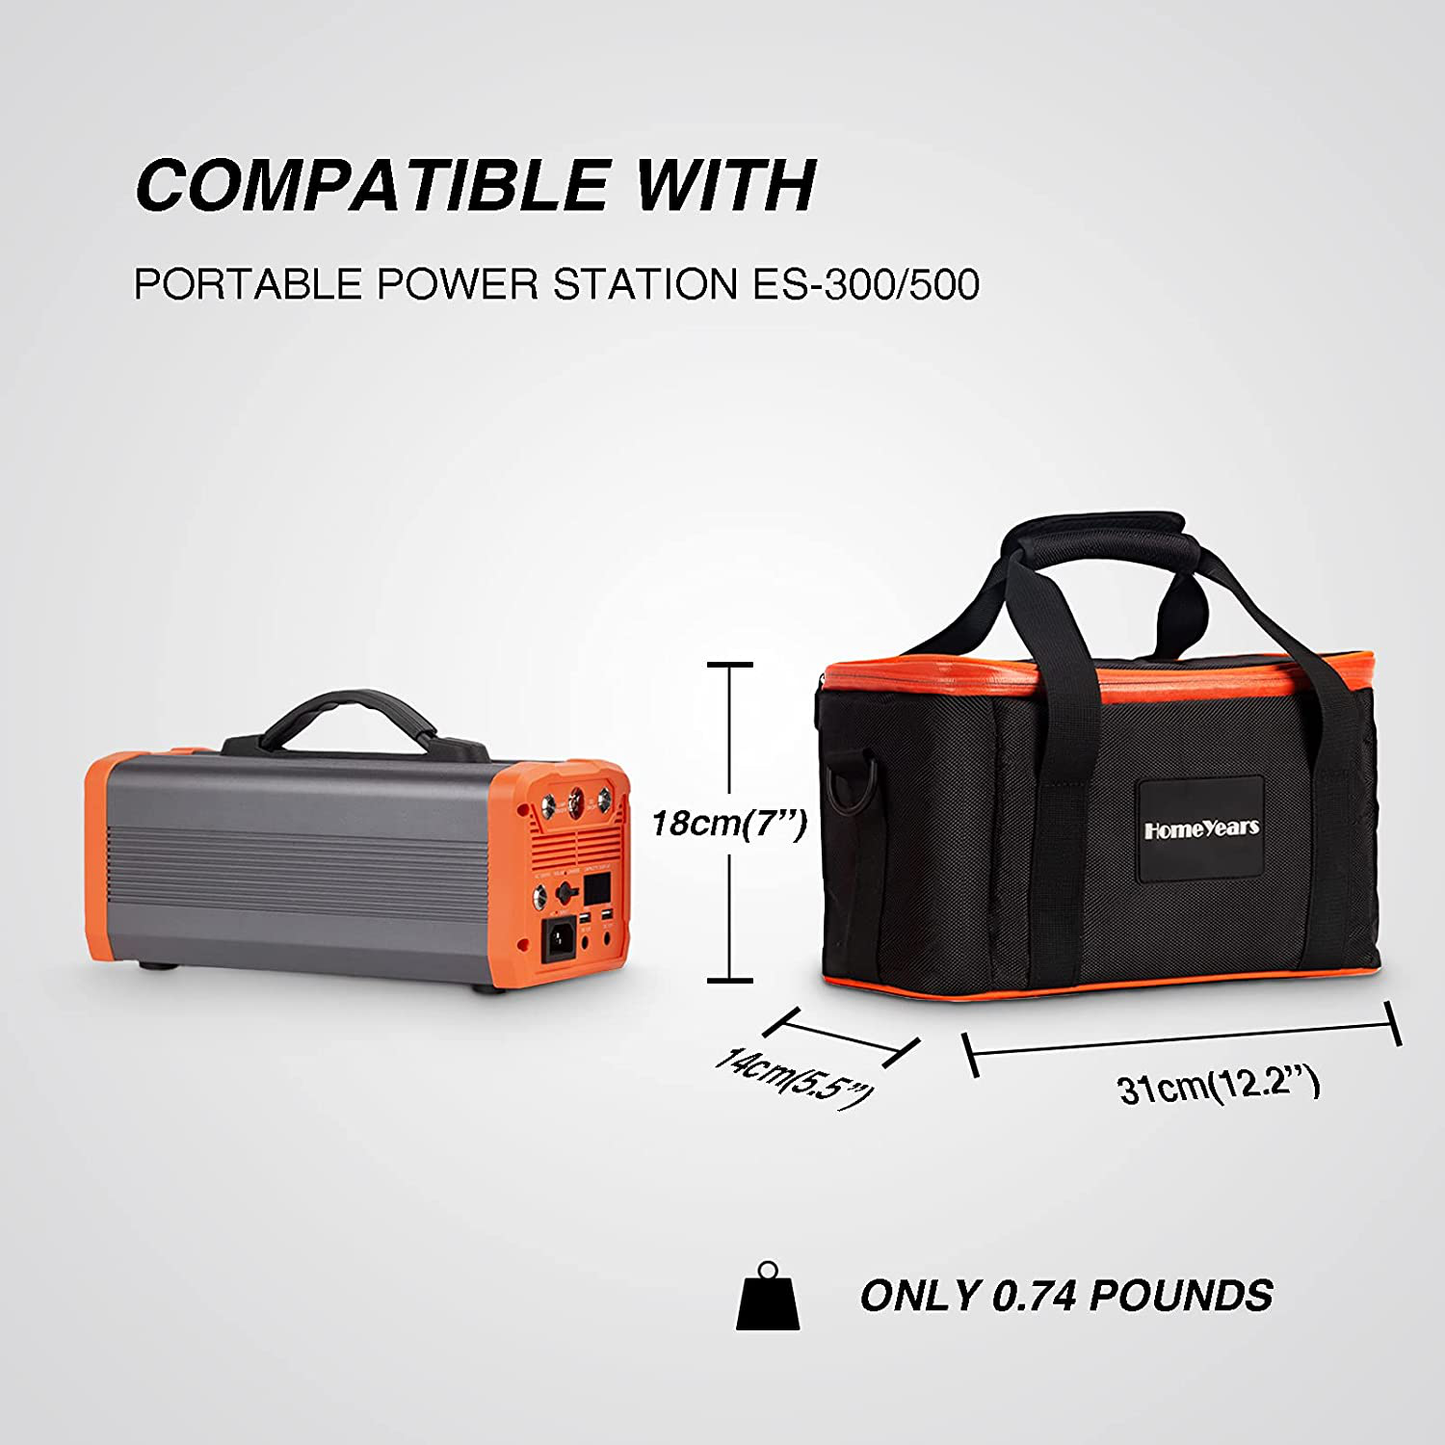 Homeyears Power Station Bag, Compatible with Portable Power Station ES-300/500, Carrying Storage Case Bag with Waterproof Fabric & Insulation, for Outdoor Camping/Travel--Black(Bag Only)